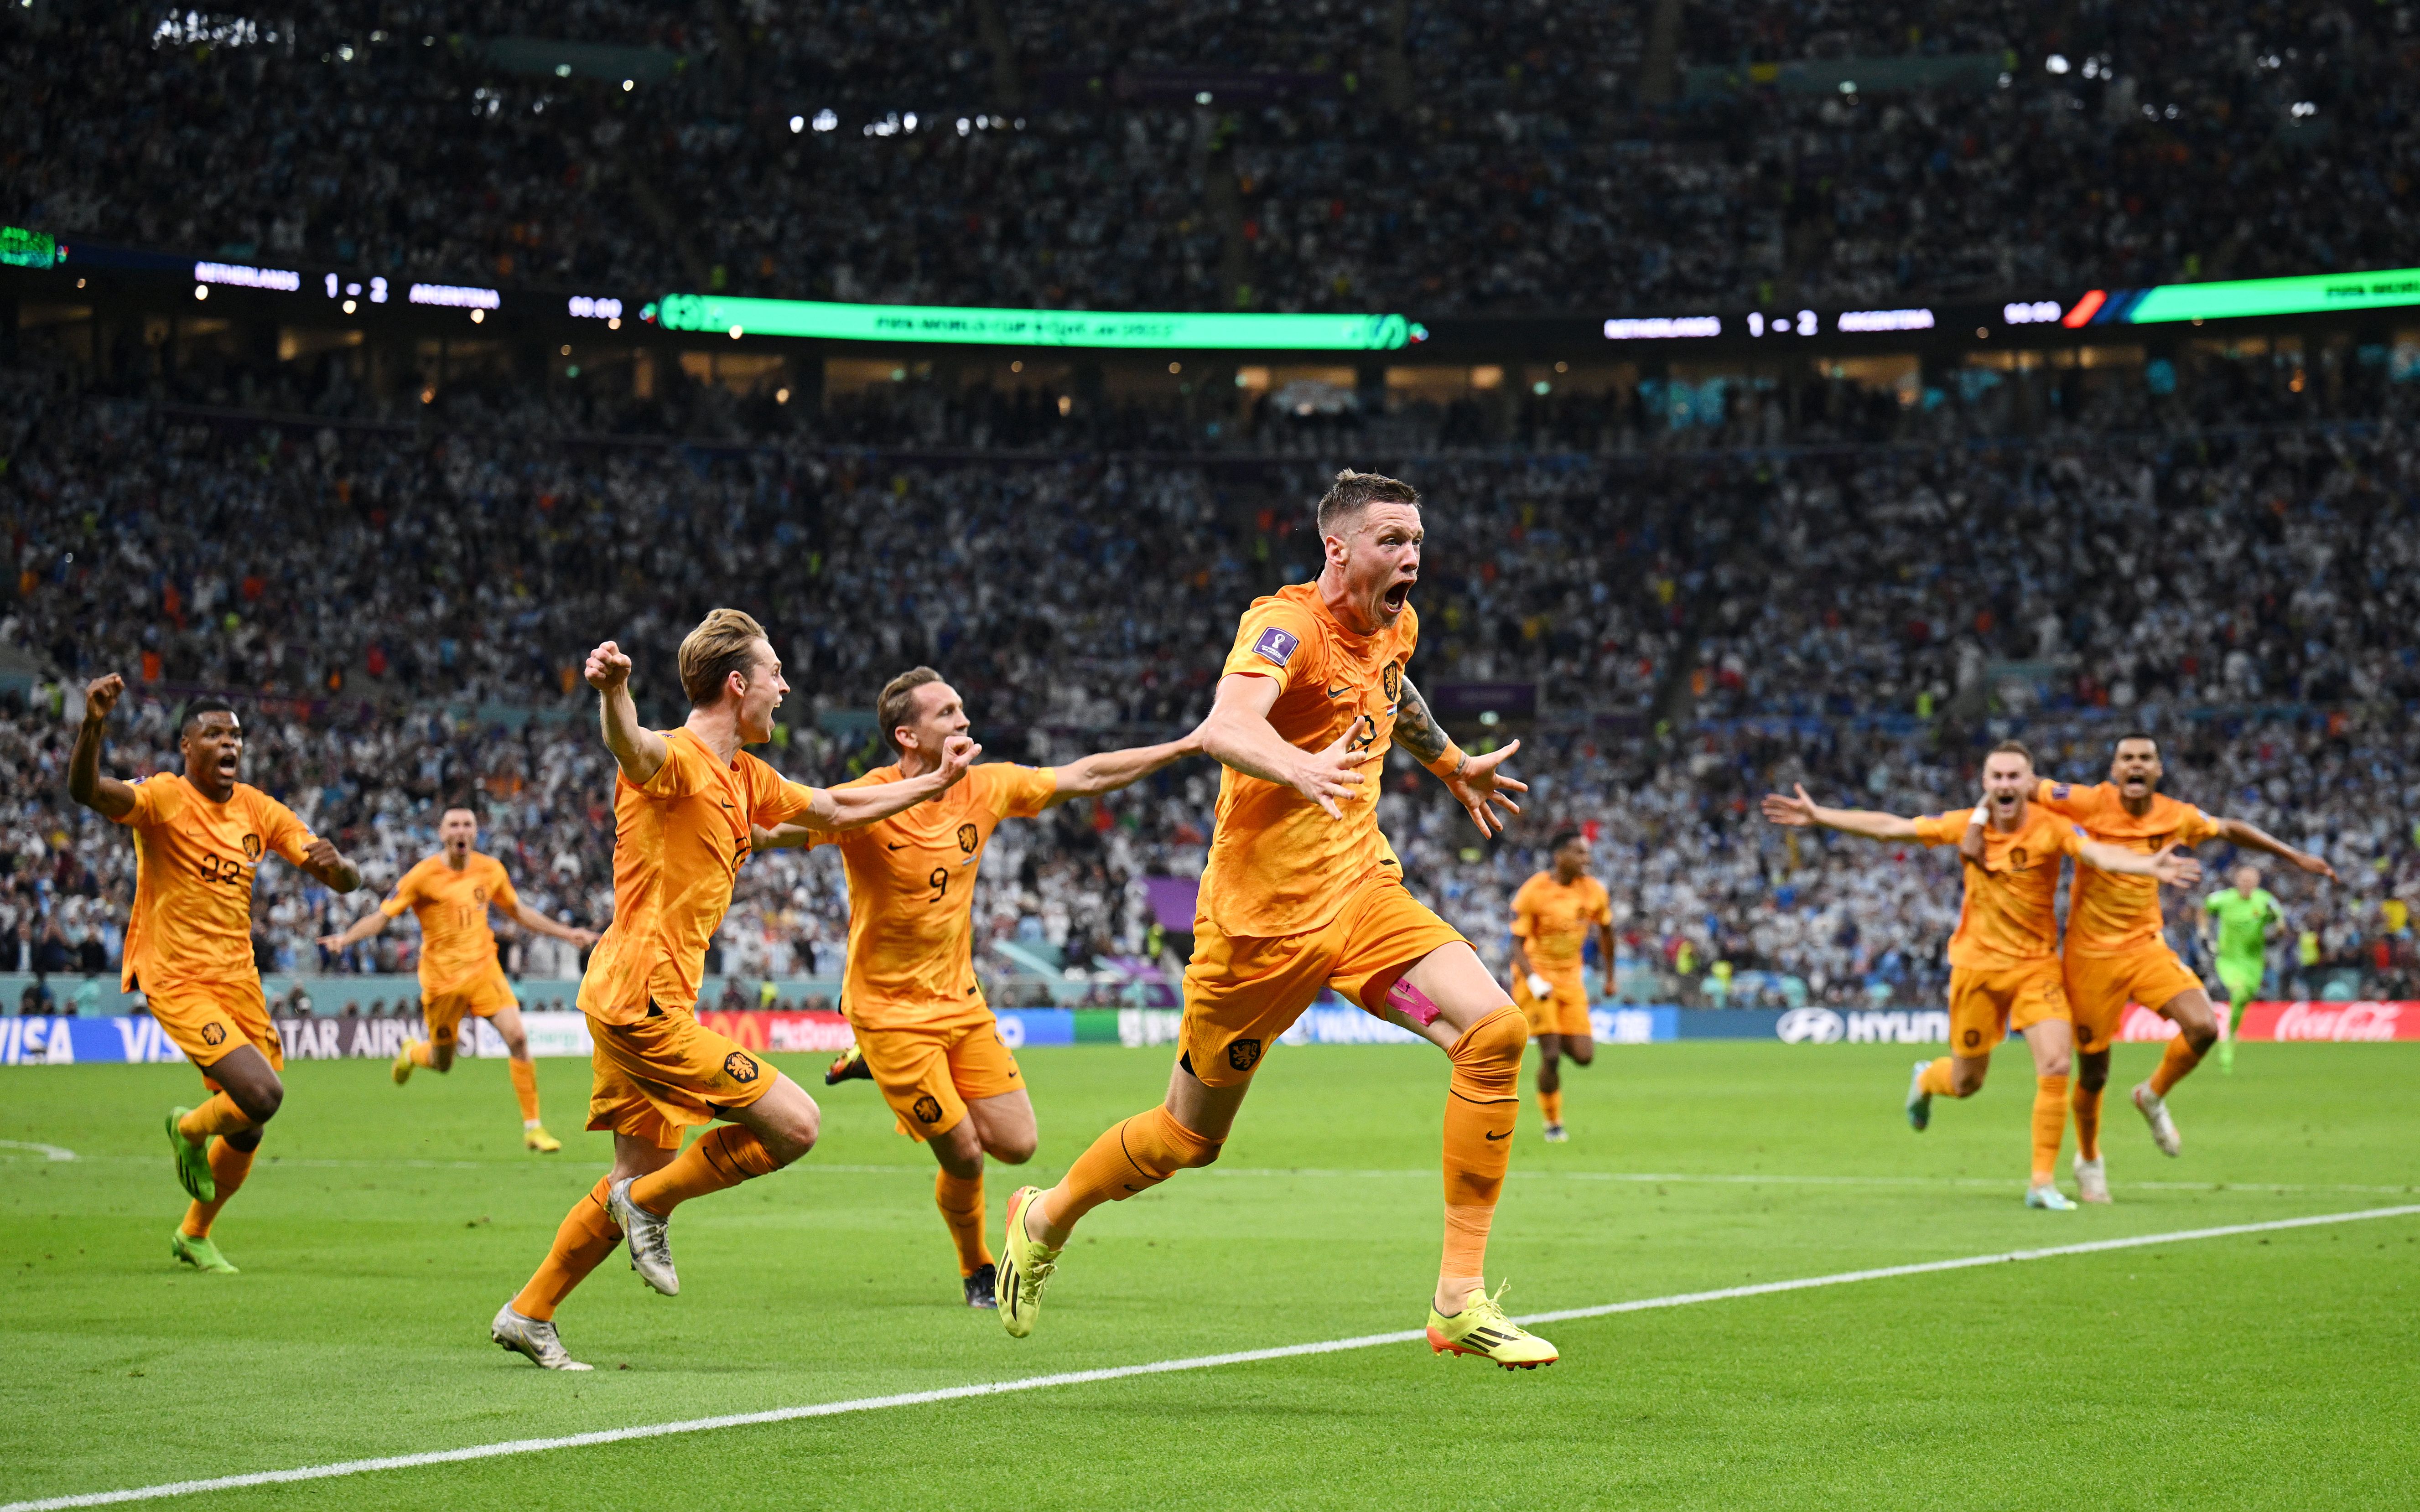 Netherlands stun Argentina with sensational free-kick routine at World Cup